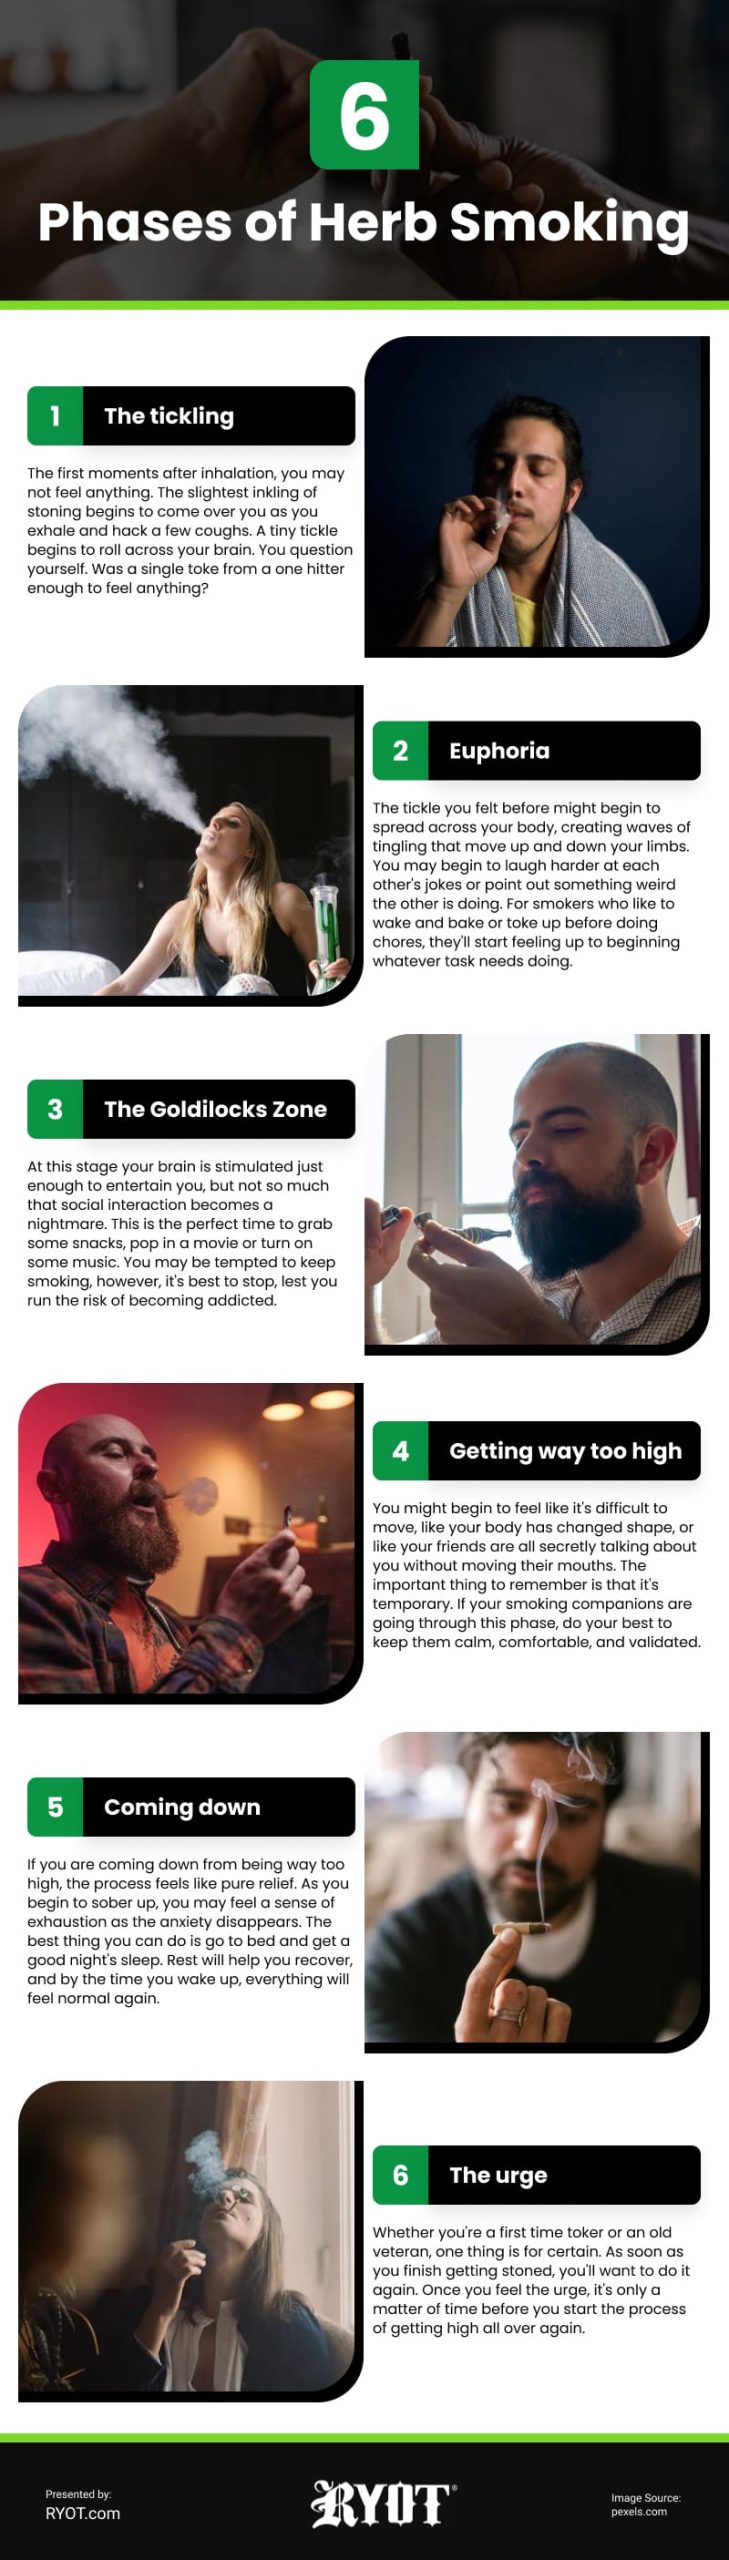 6 Phases of Herb Smoking Infographic